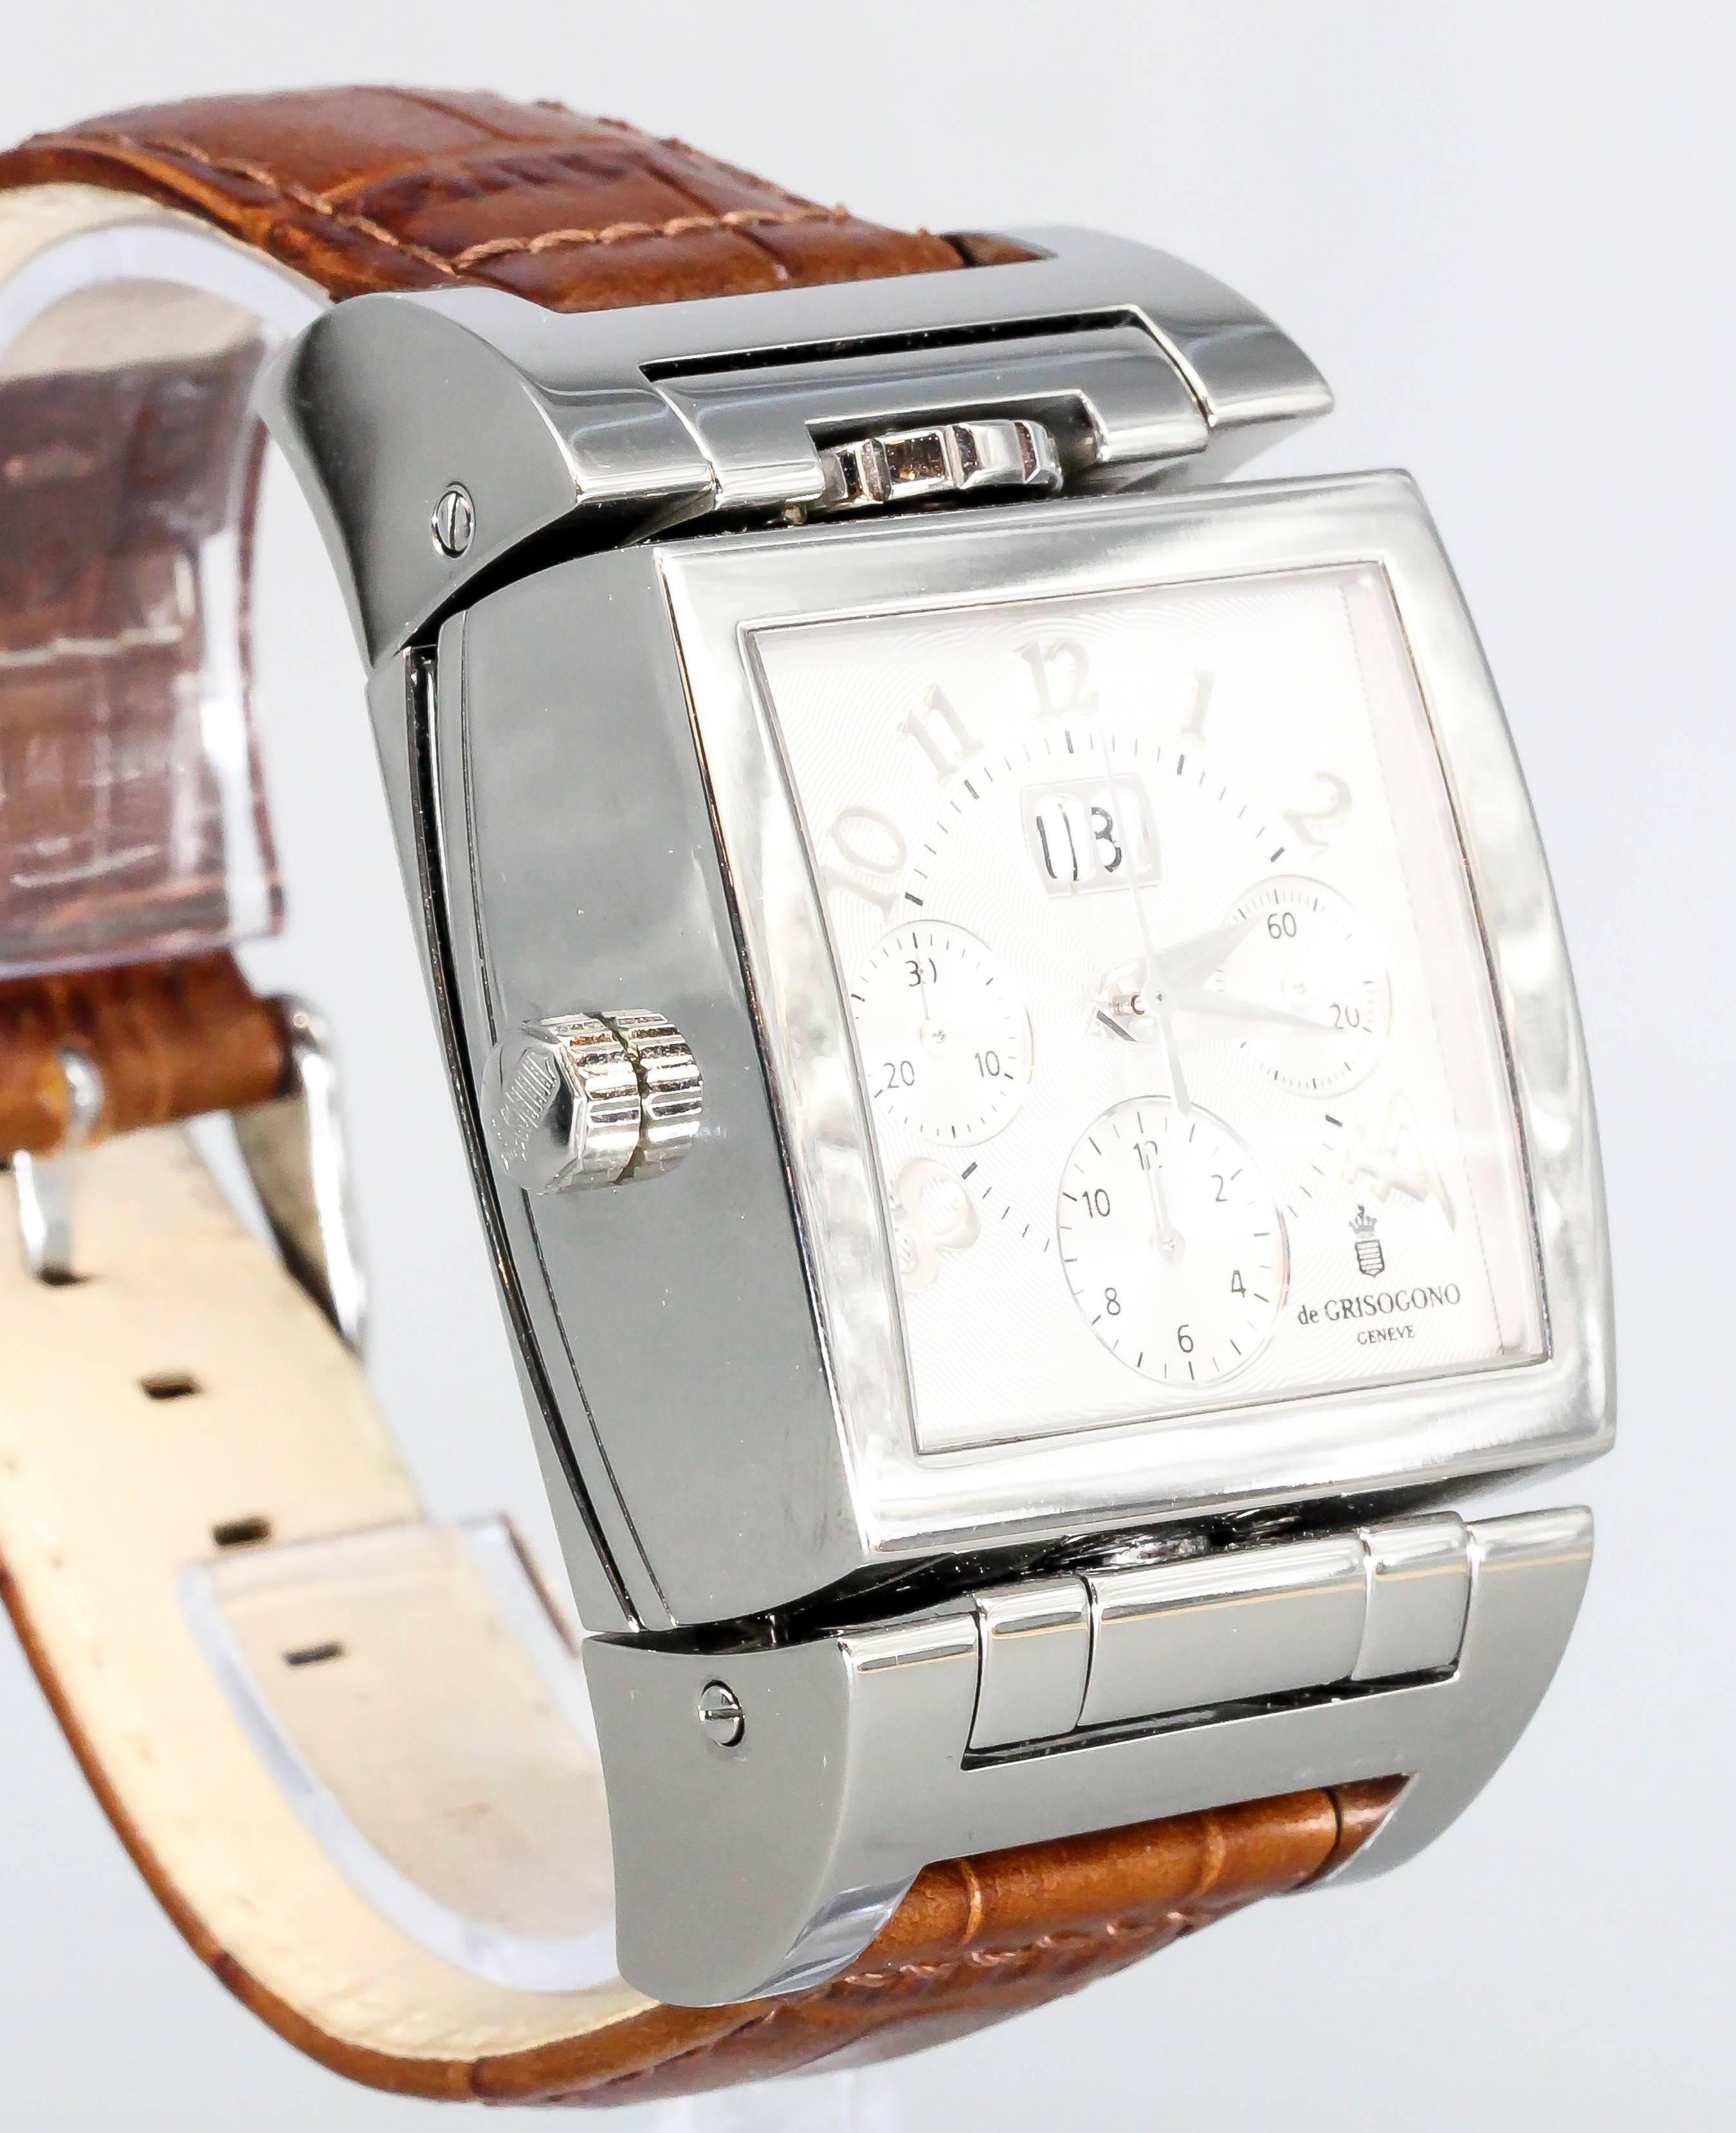 Handsome stainless steel wrist watch by De Grisogono, known as the Instrumento Doppio. It features a chronograph function, second time zone on the reverso face, and a large date near the 12 o'clock marker.  Can be worn with both faces, and can be